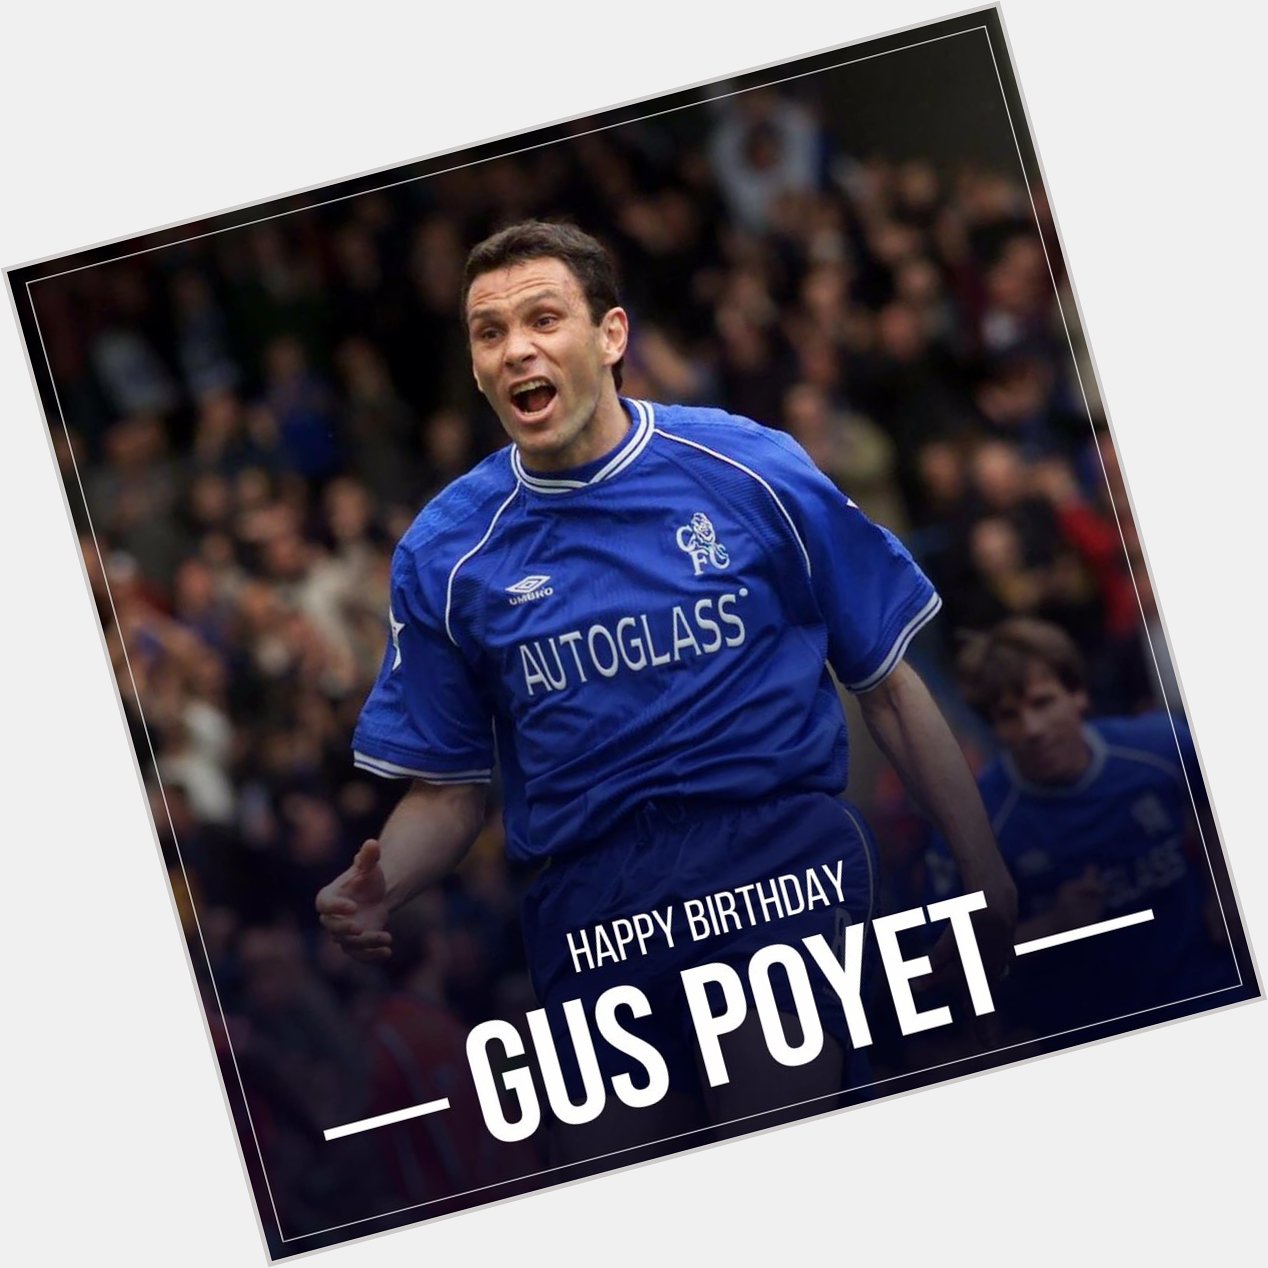 Wishing a very Happy Birthday to our former midfield star Gustavo \GUS\ Poyet who turns 51 today! 